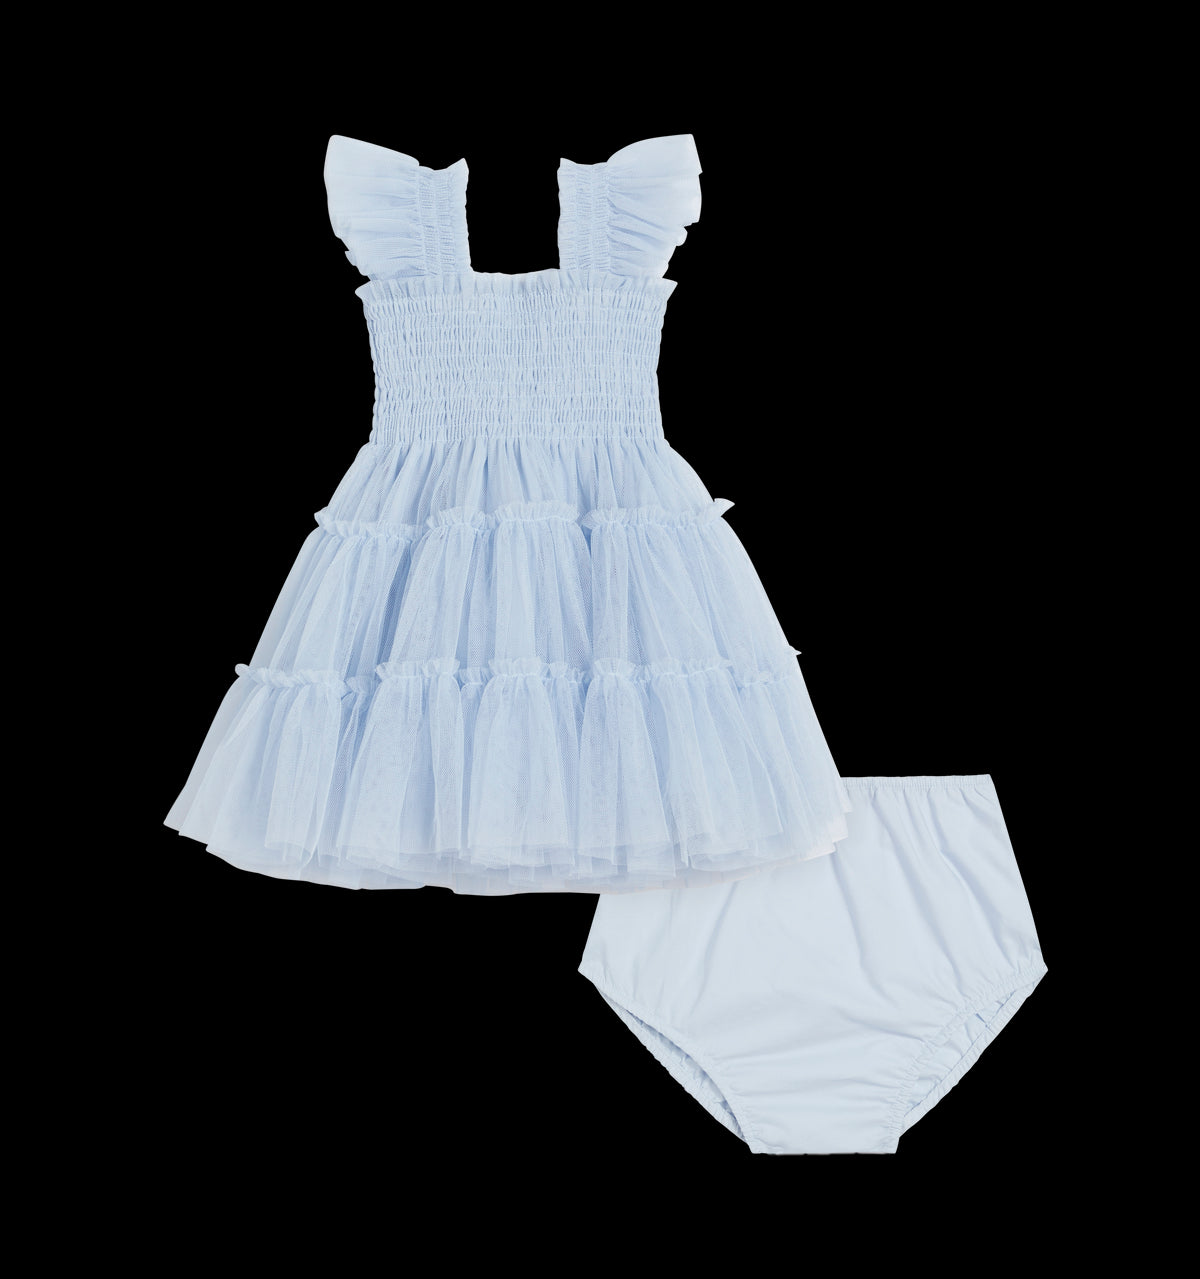 The Tulle Ribbon Ellie Nap Dress - White Tulle with Blue Ribbon